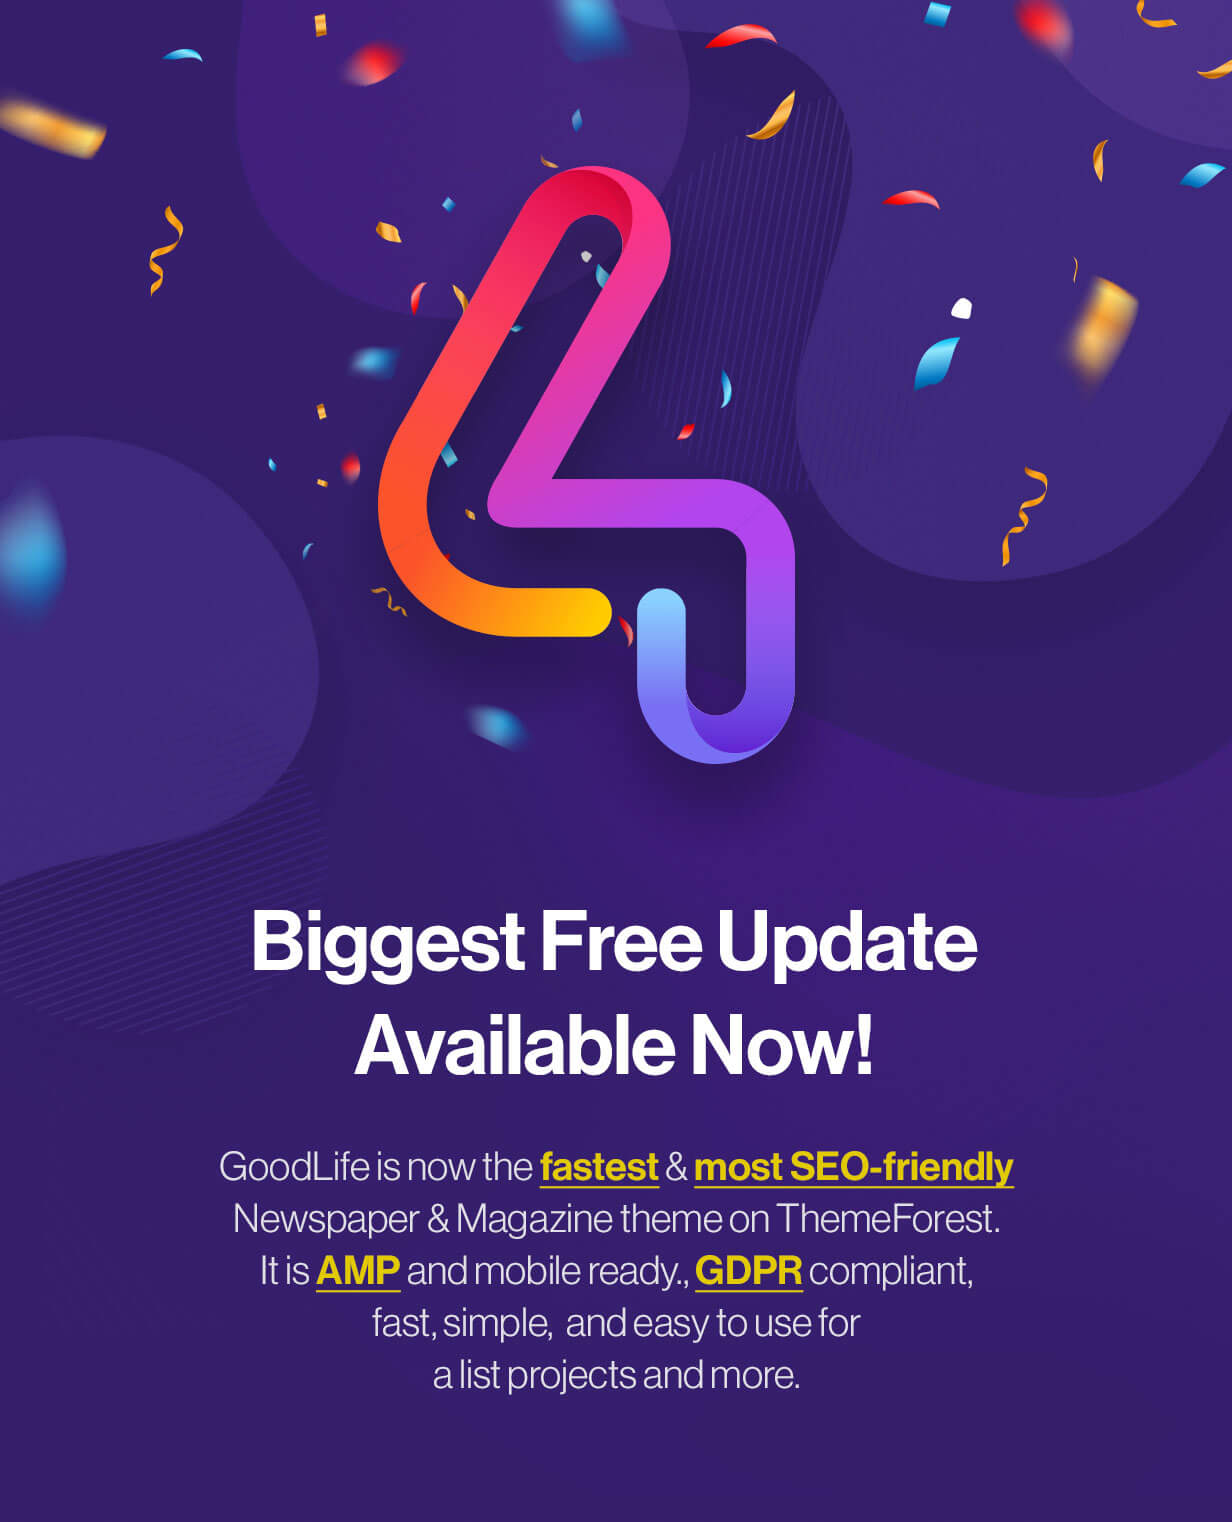 Biggest free update available.